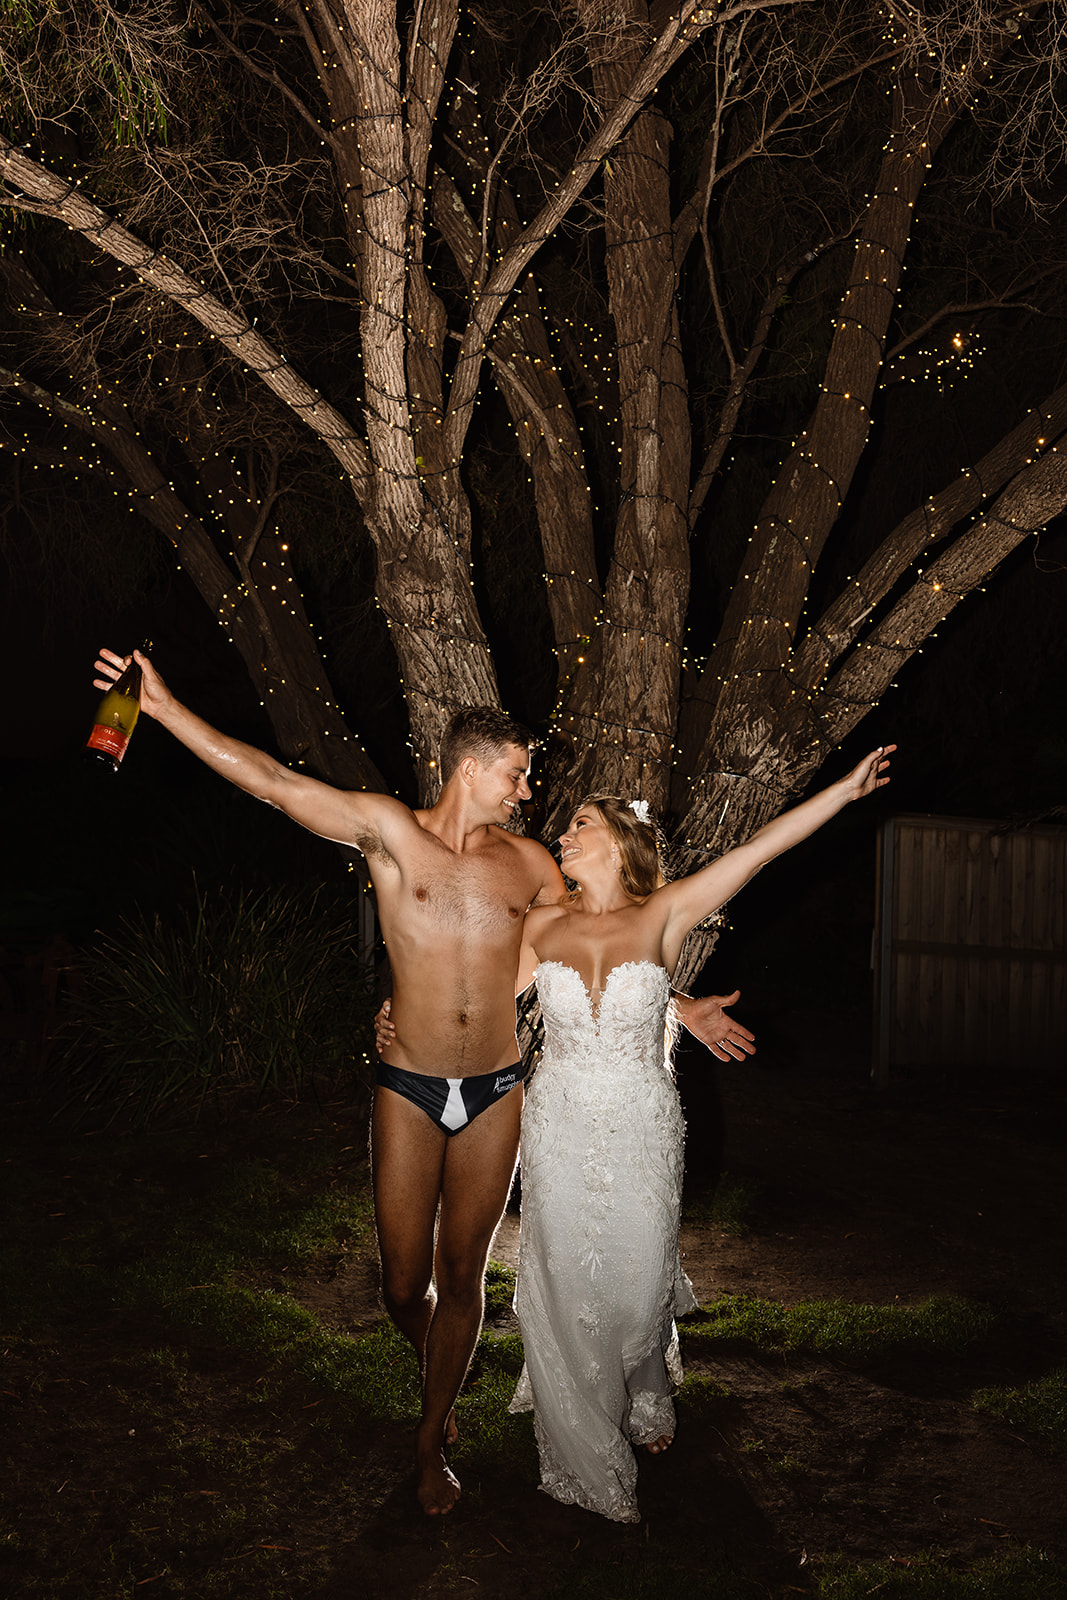 Couple champagne shower at the Wedding in The Cove Jervis Bay